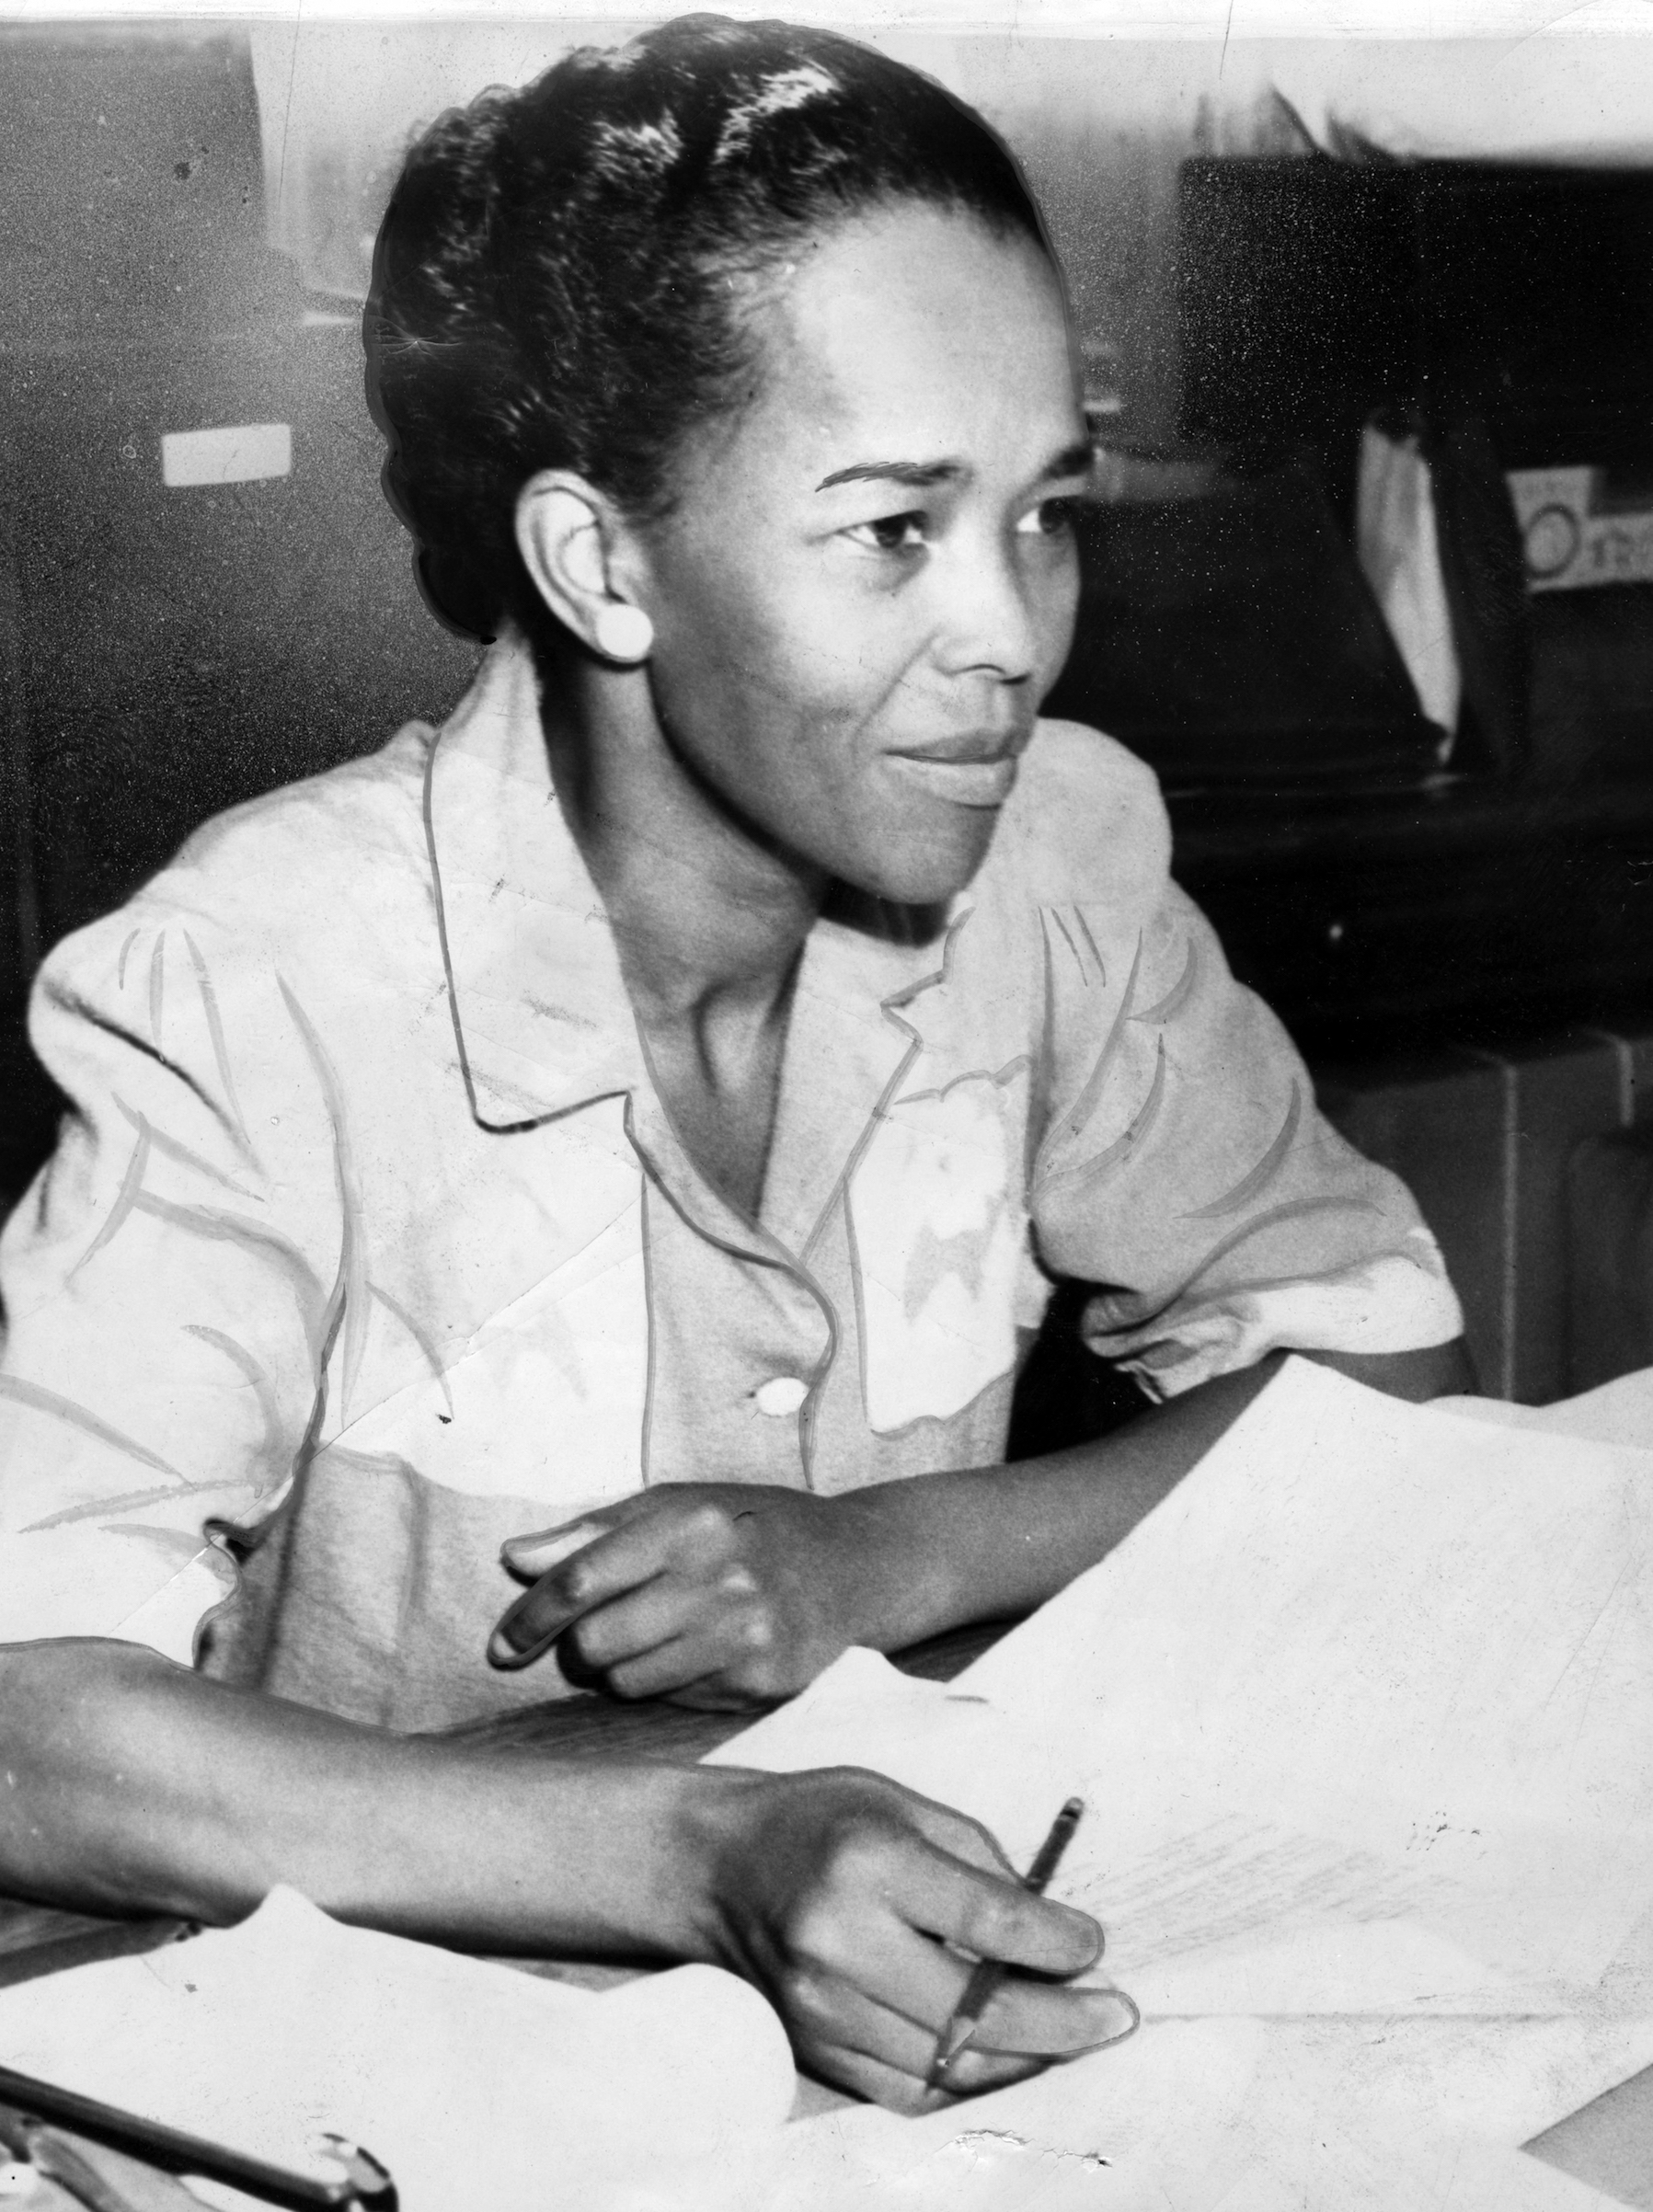 A photograph of Ella Baker as NAACP Hatfield representative, behind a desk with paperwork, Sept. 18, 1941. (Afro Newspaper/Gado/Getty Images)